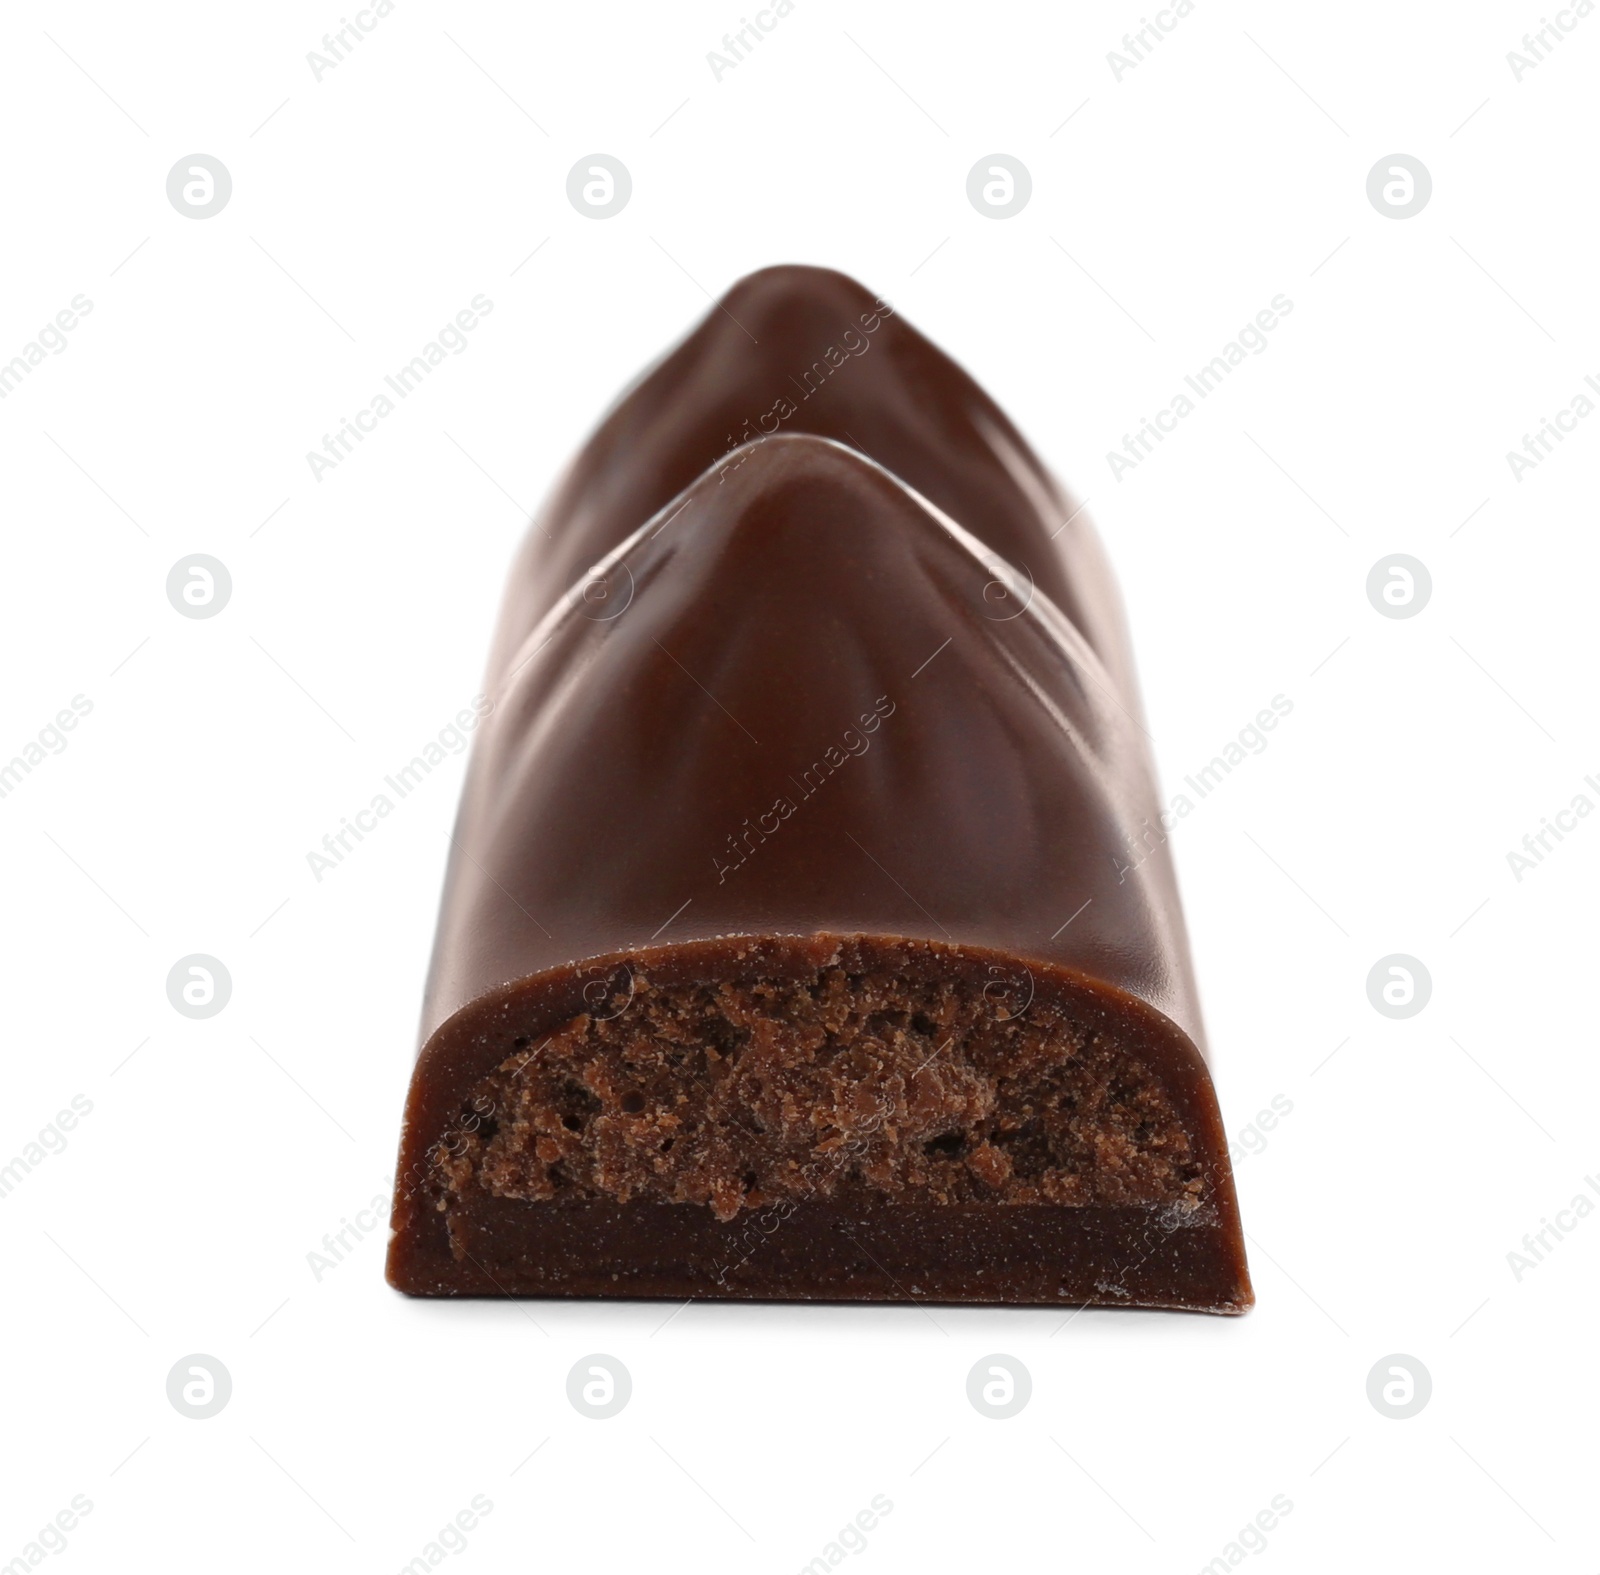 Photo of Piece of tasty chocolate bar on white background